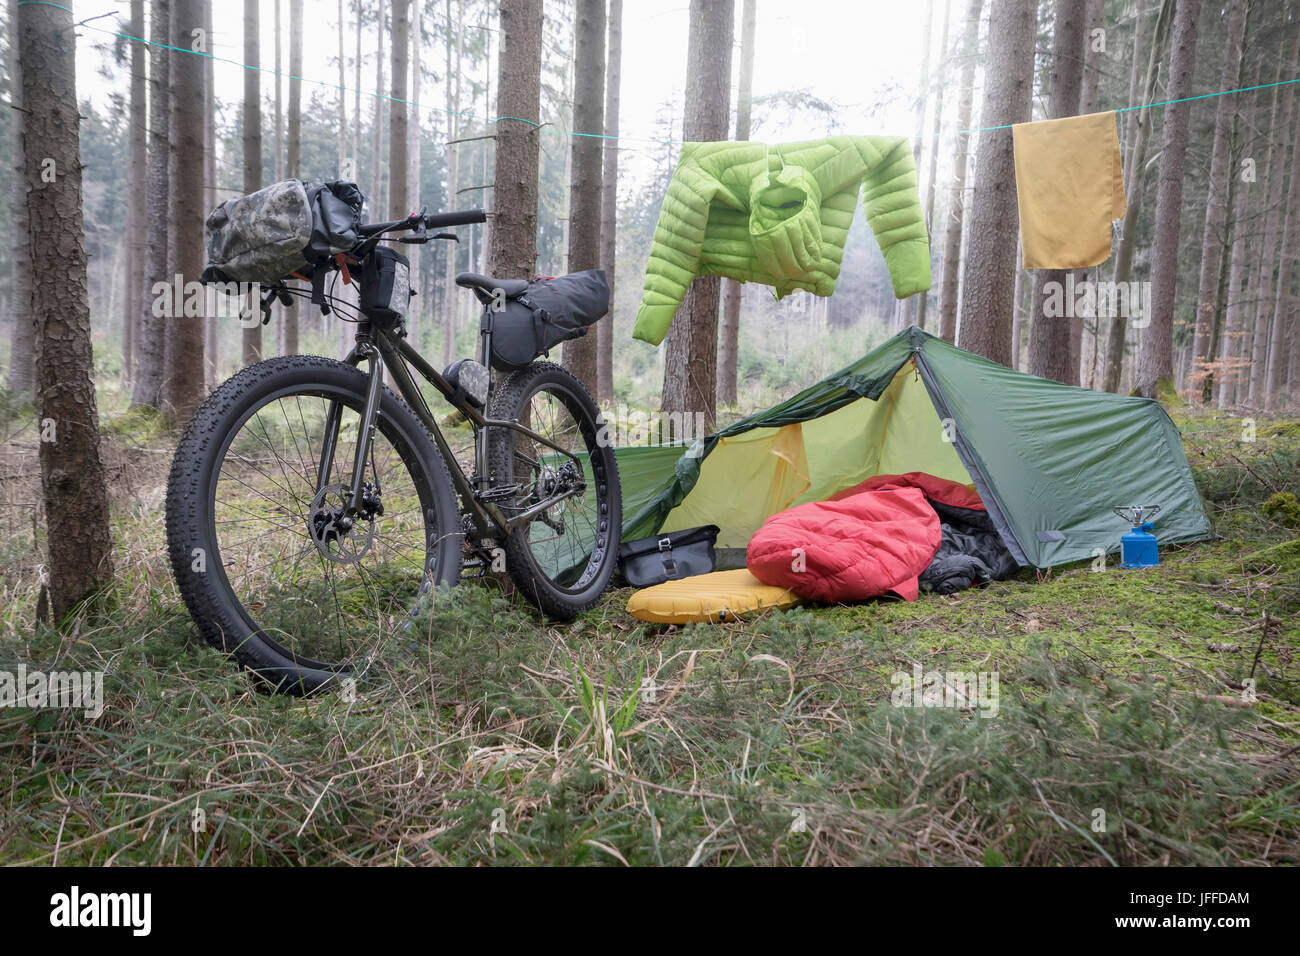 Mountain bike parked by tree trunks with tent and clothesline by it in forest Stock Photo